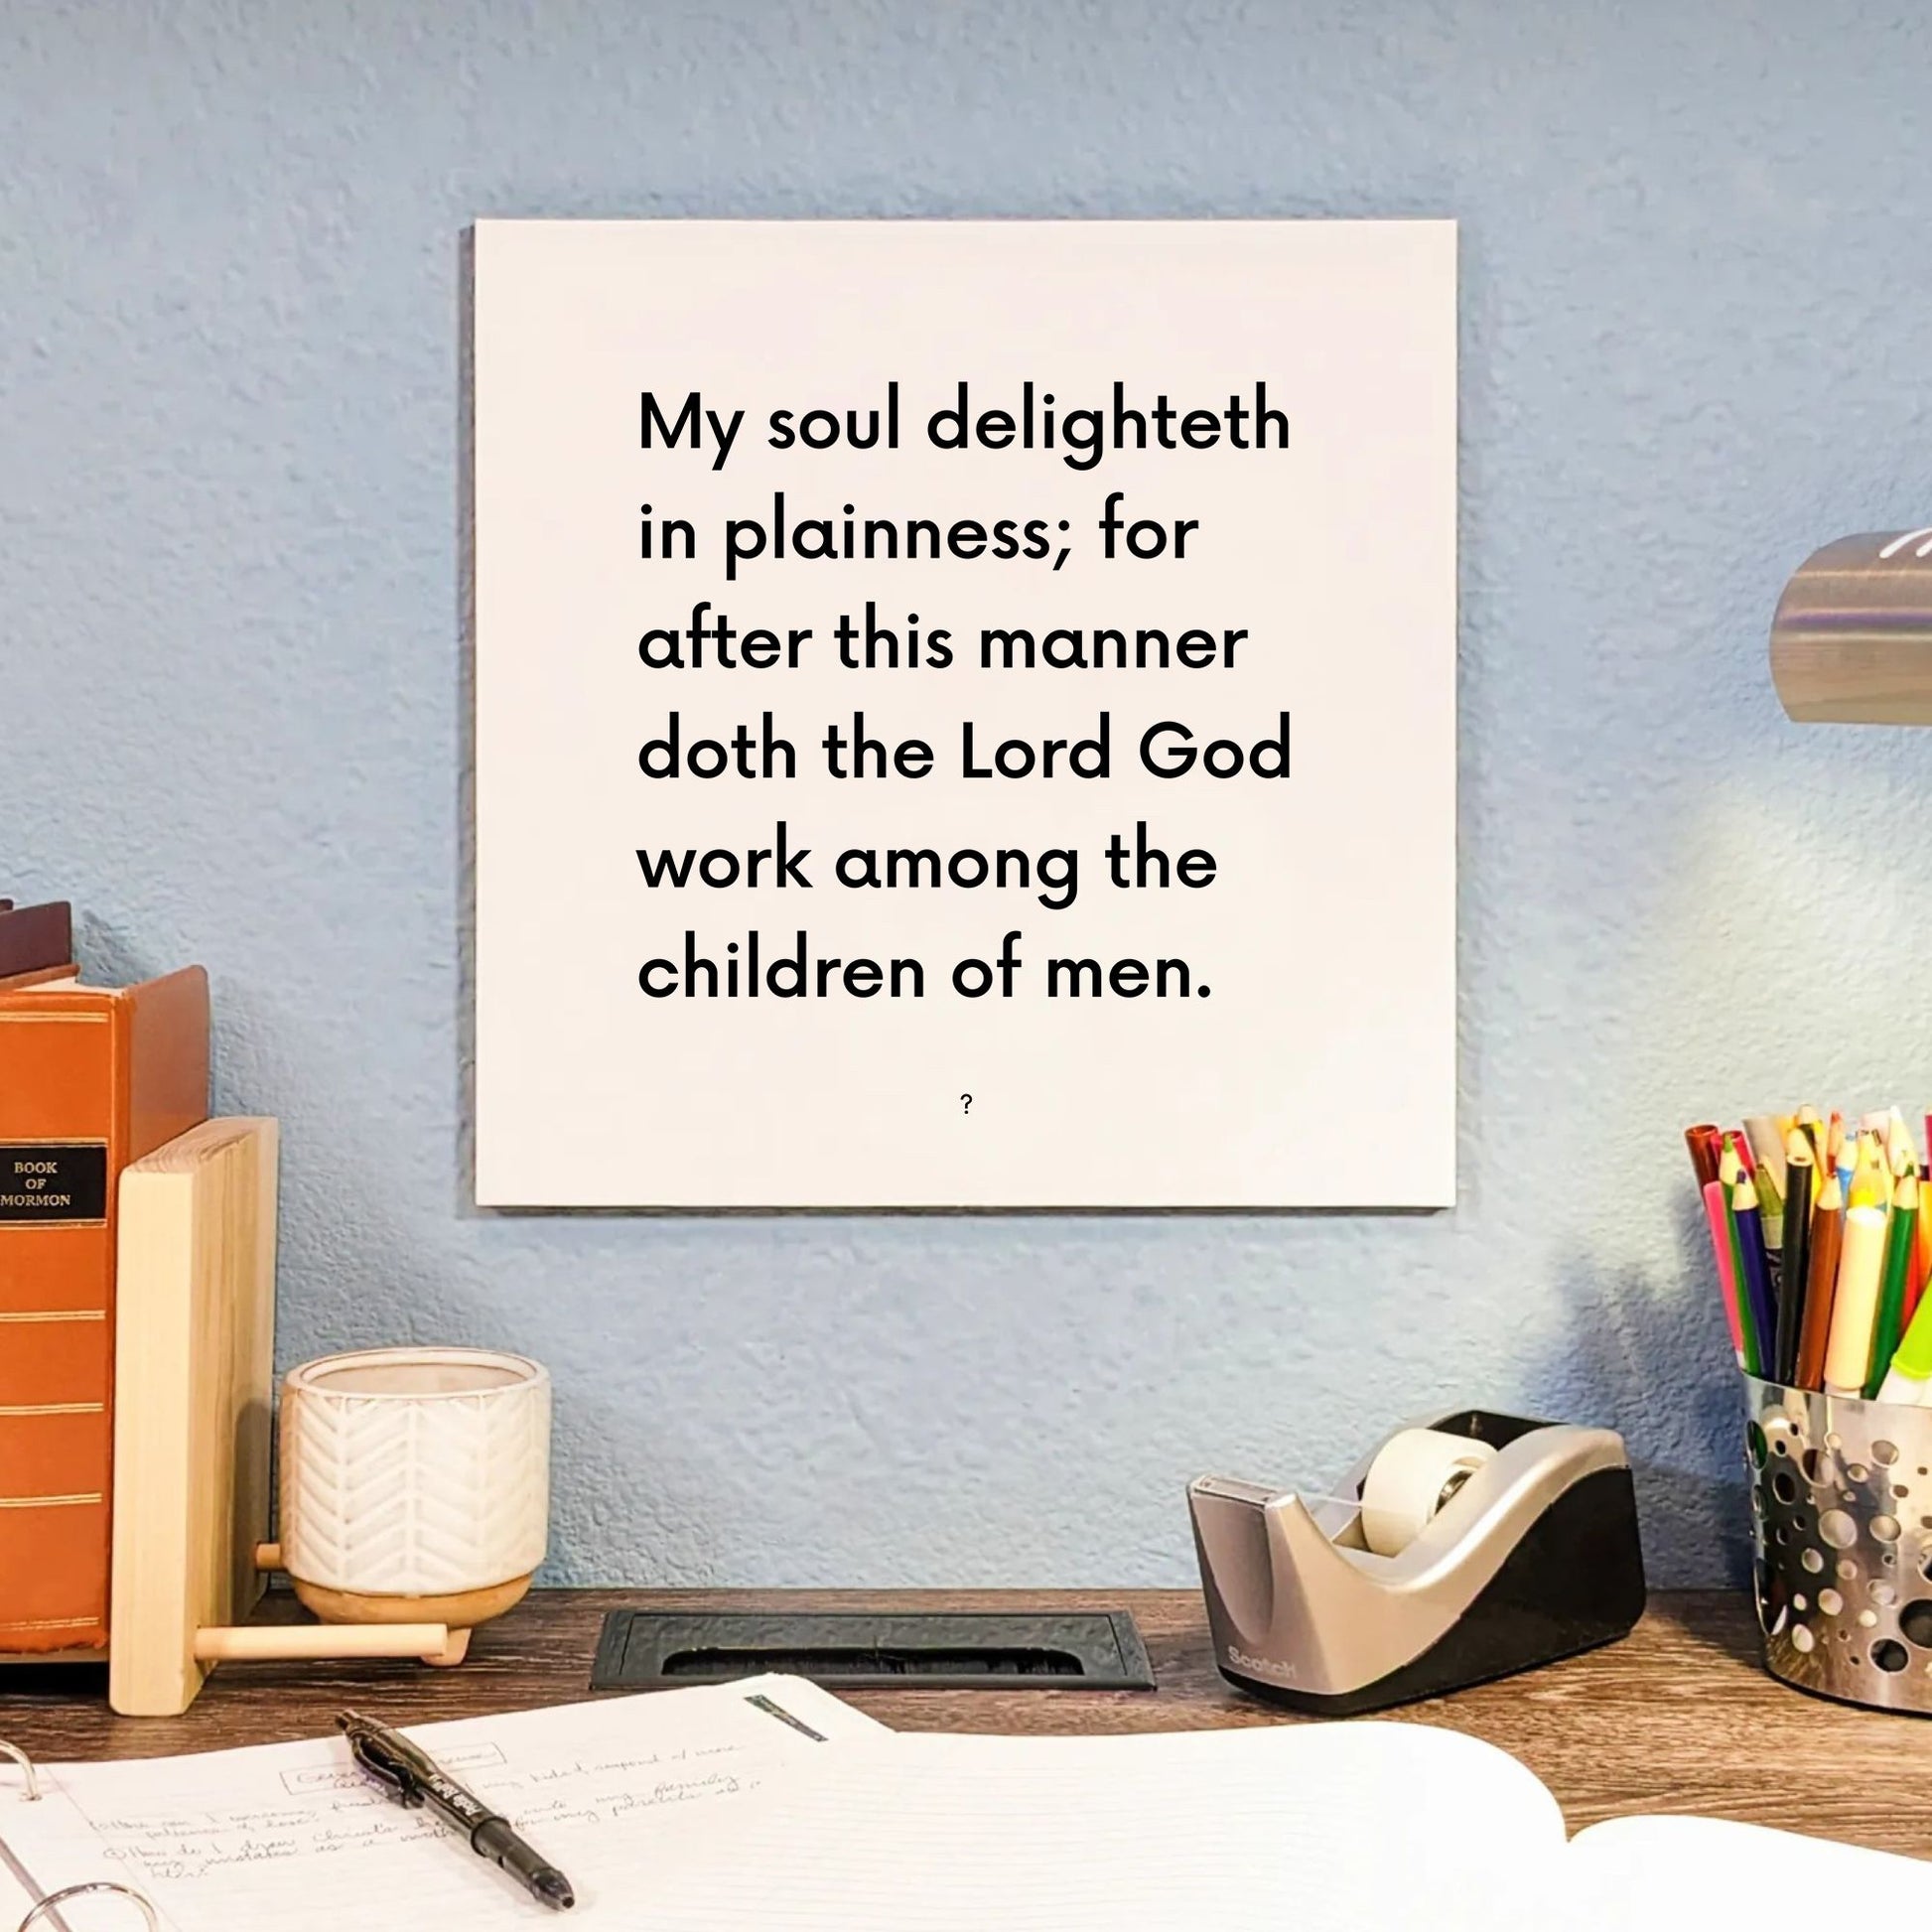 Desk mouting of the scripture tile for 2 Nephi 31:3 - "My soul delighteth in plainness"